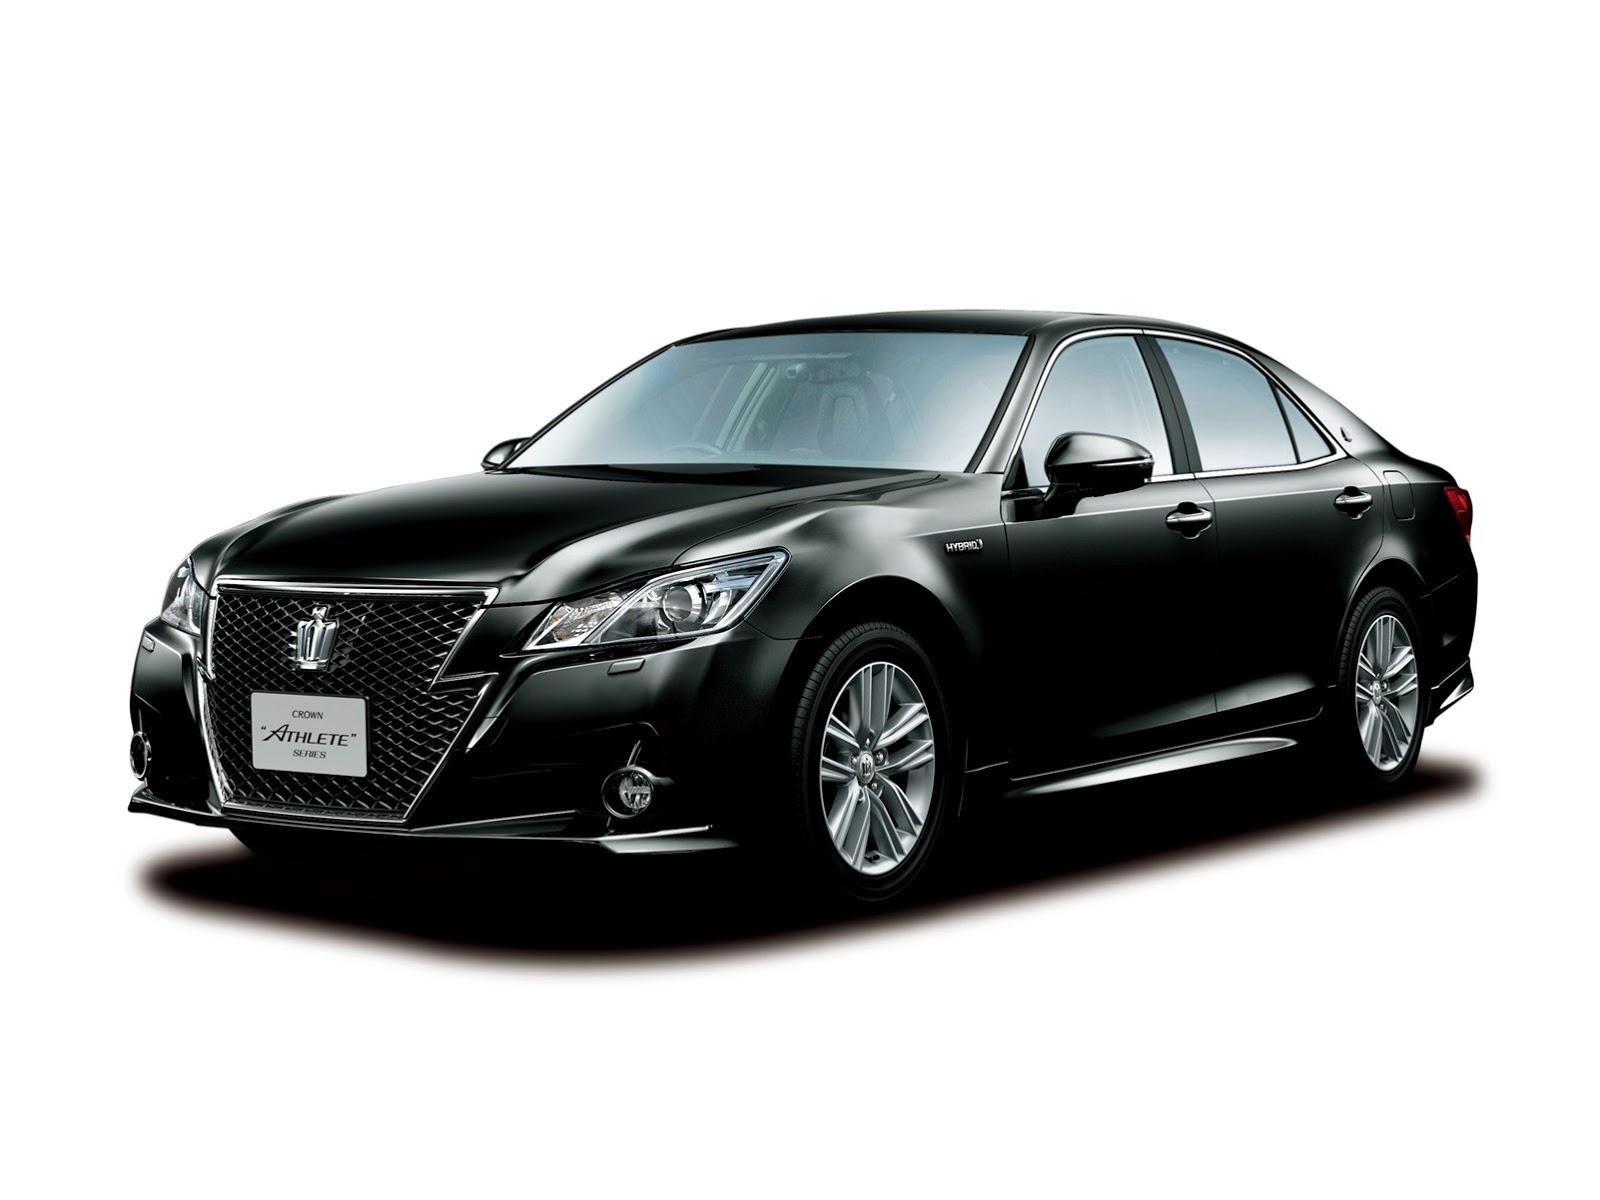 World of Wallpapers: Toyota New Cars (2013-Onwards)